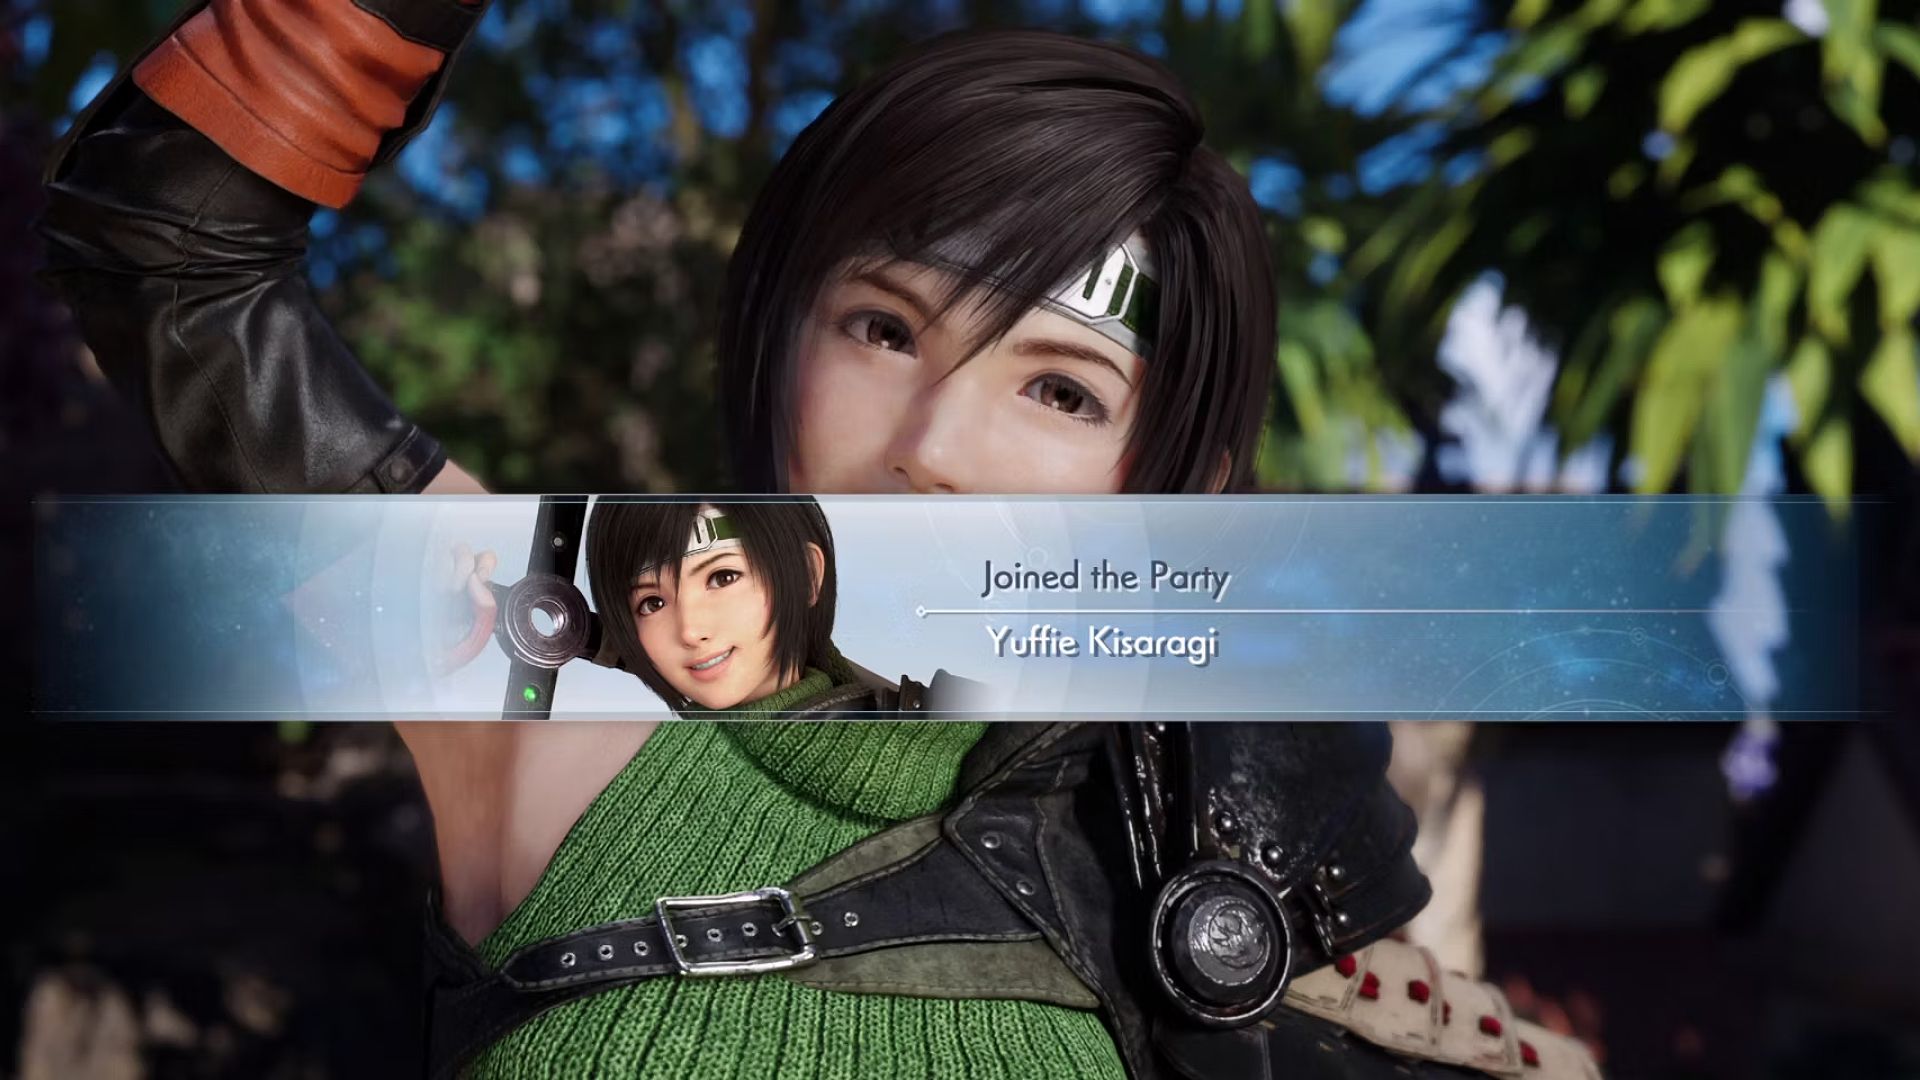 Yuffie joining the party in Final Fantasy 7 Rebirth